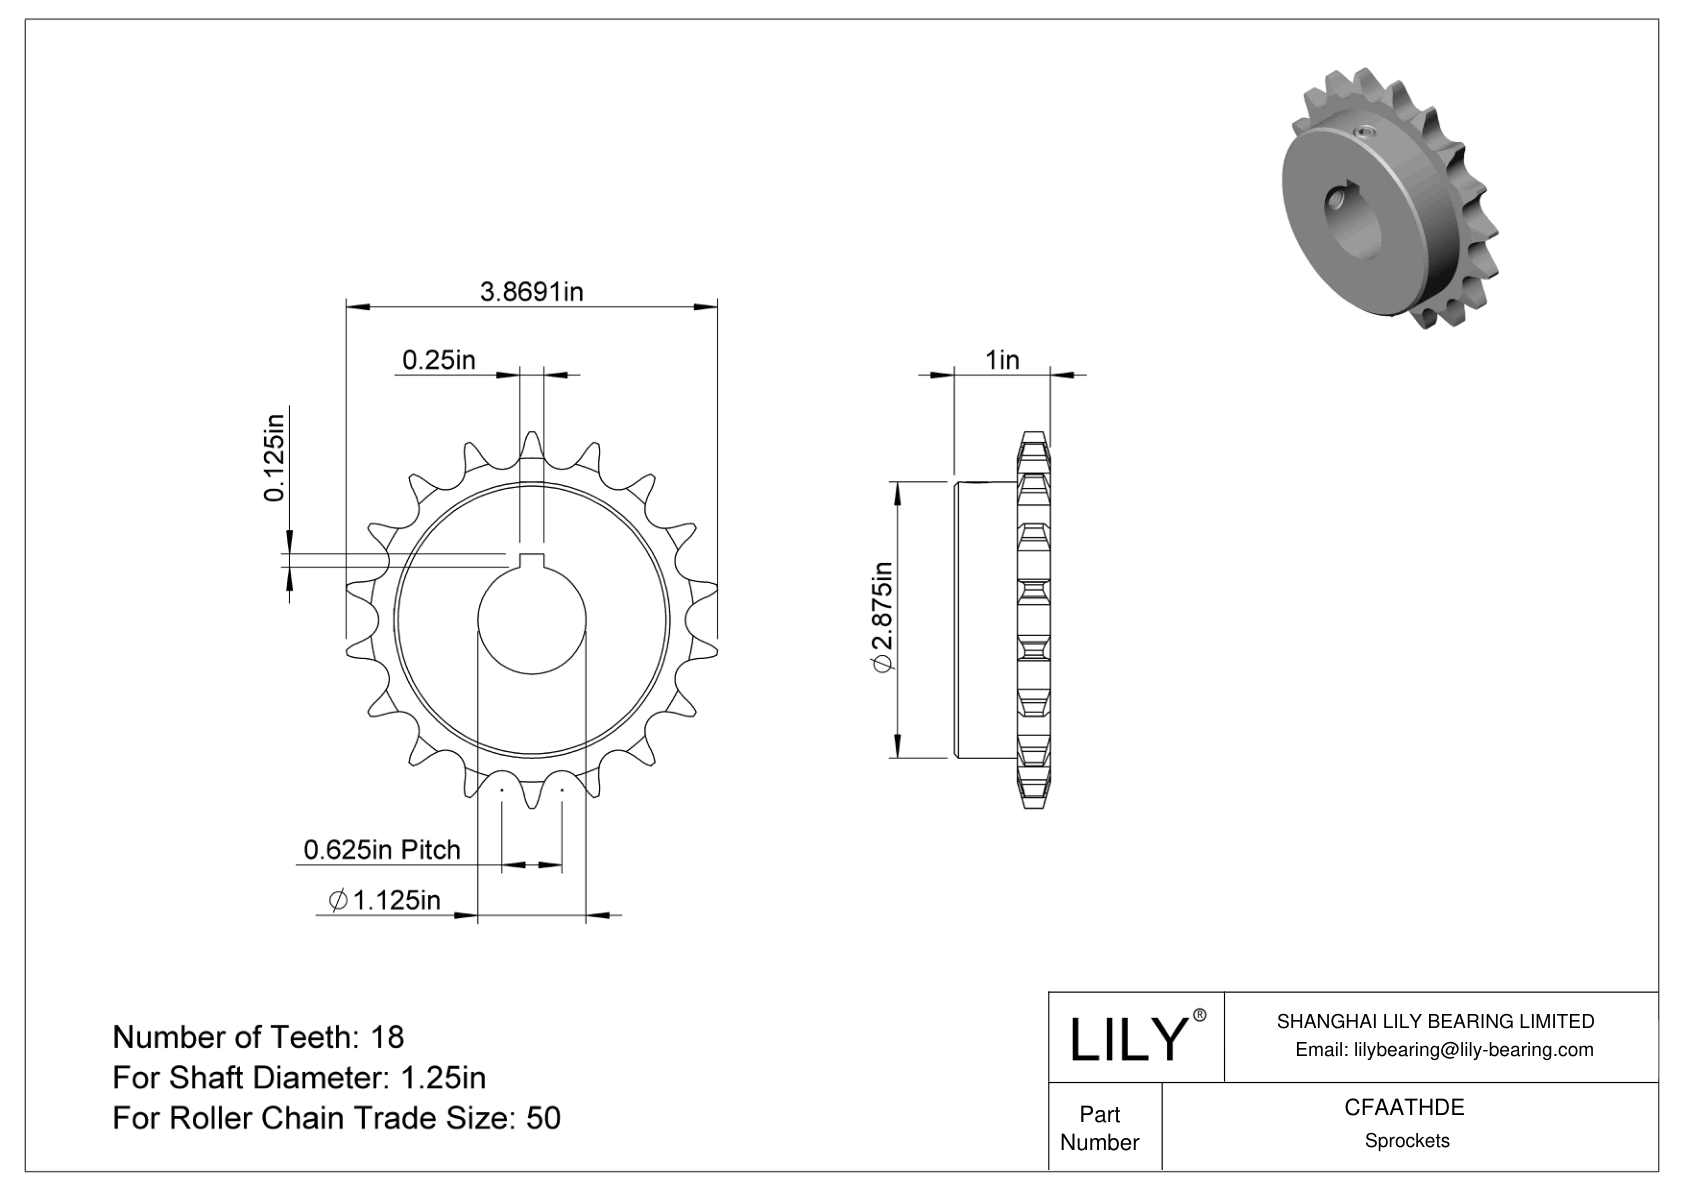 CFAATHDE Wear-Resistant Sprockets for ANSI Roller Chain cad drawing